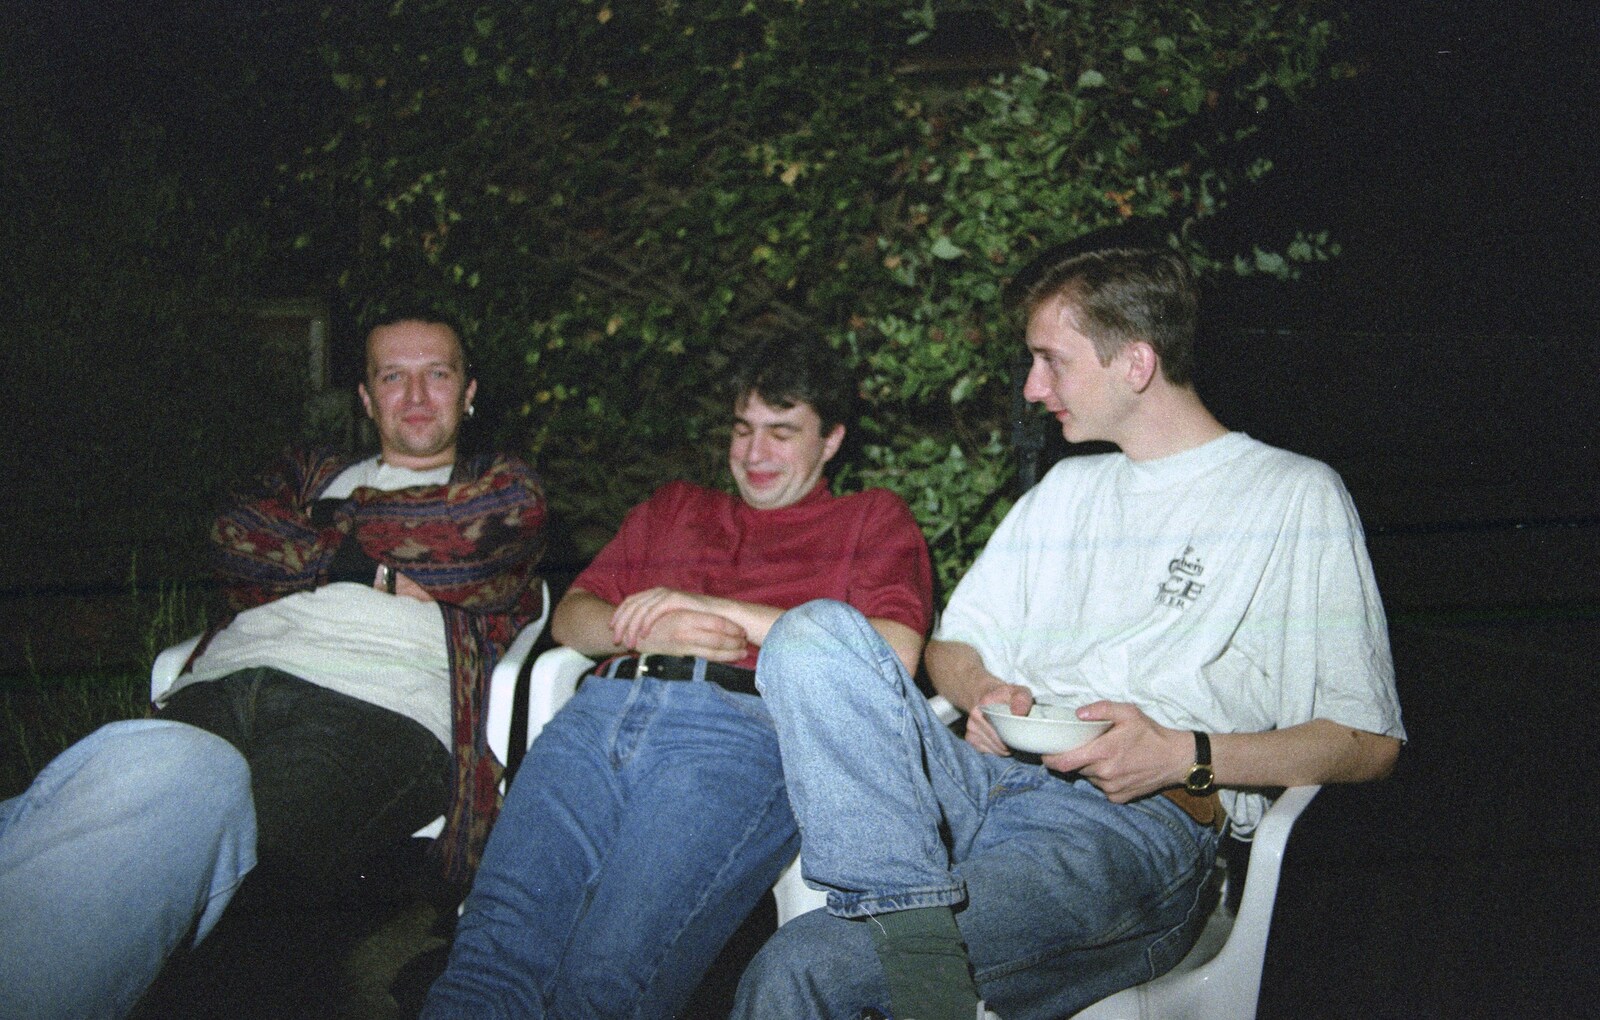 Stuart, Neil and Andrew from Andrew's CISU Party, and Nosher's Garden Barbeque, Ipswich and Brome, Suffolk - June 10th 1998